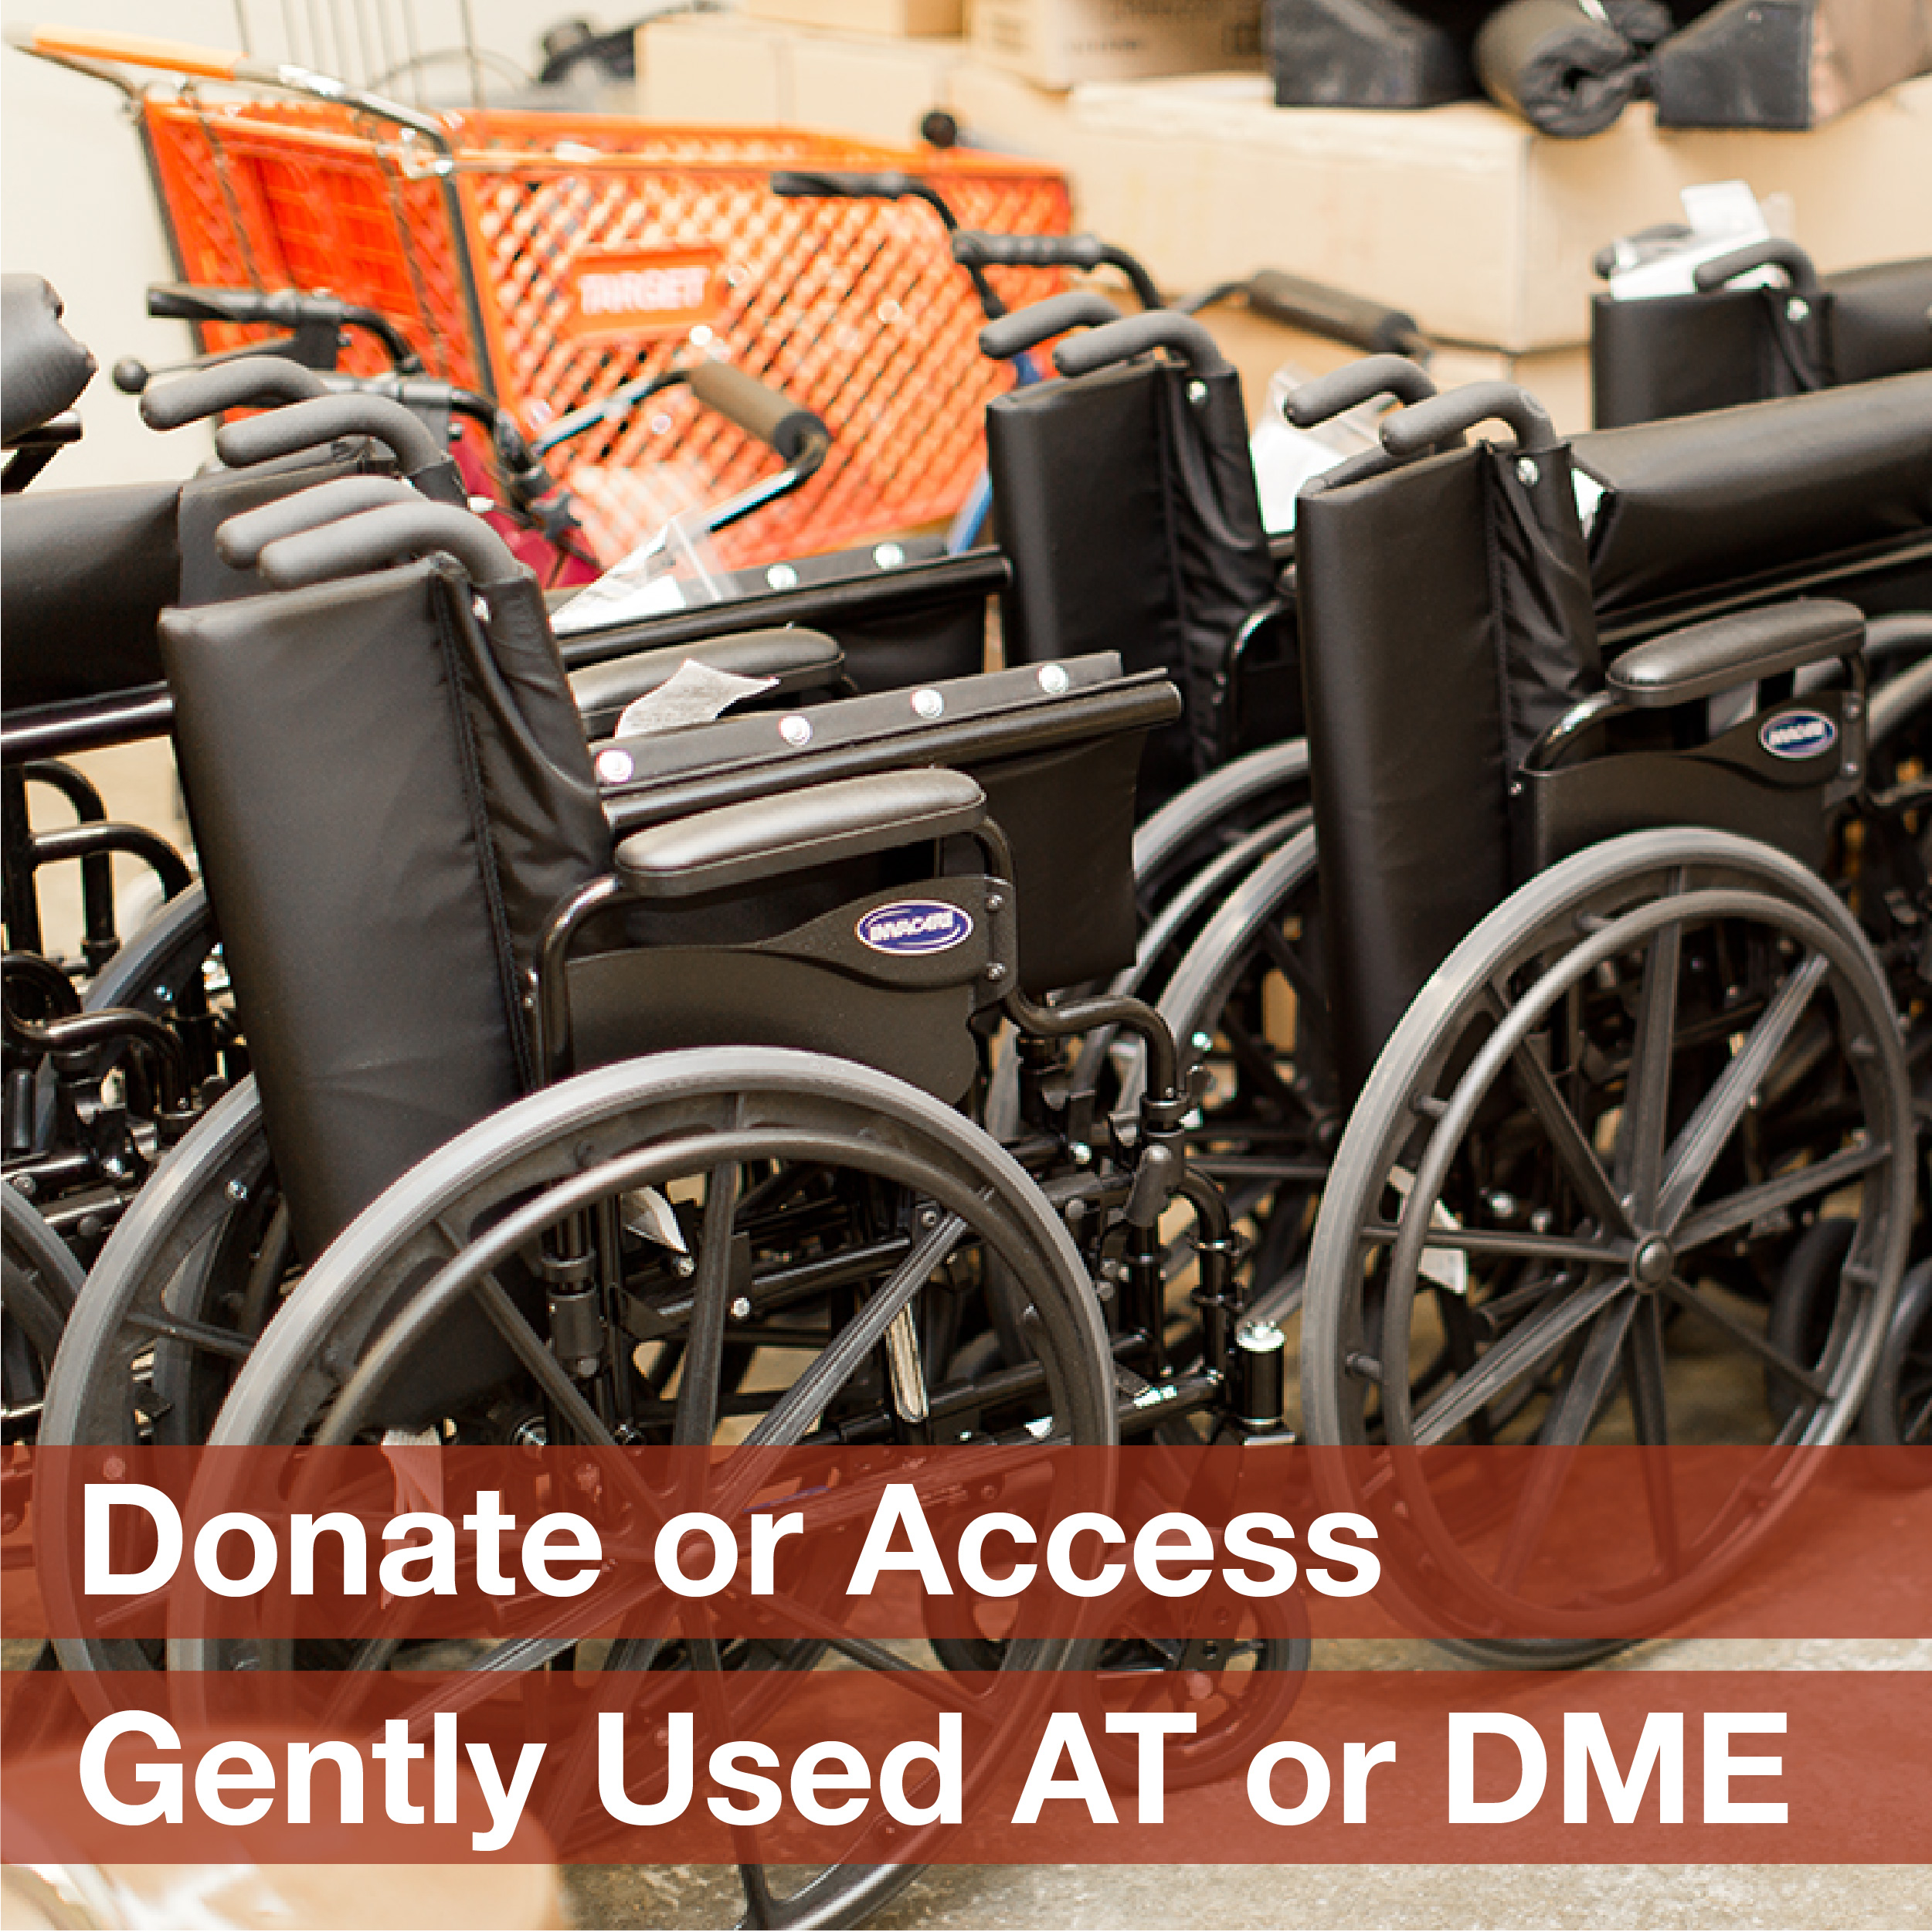 A line of manual wheelchairs accompanied by the phrase “Donate or access gently used AT or DME”